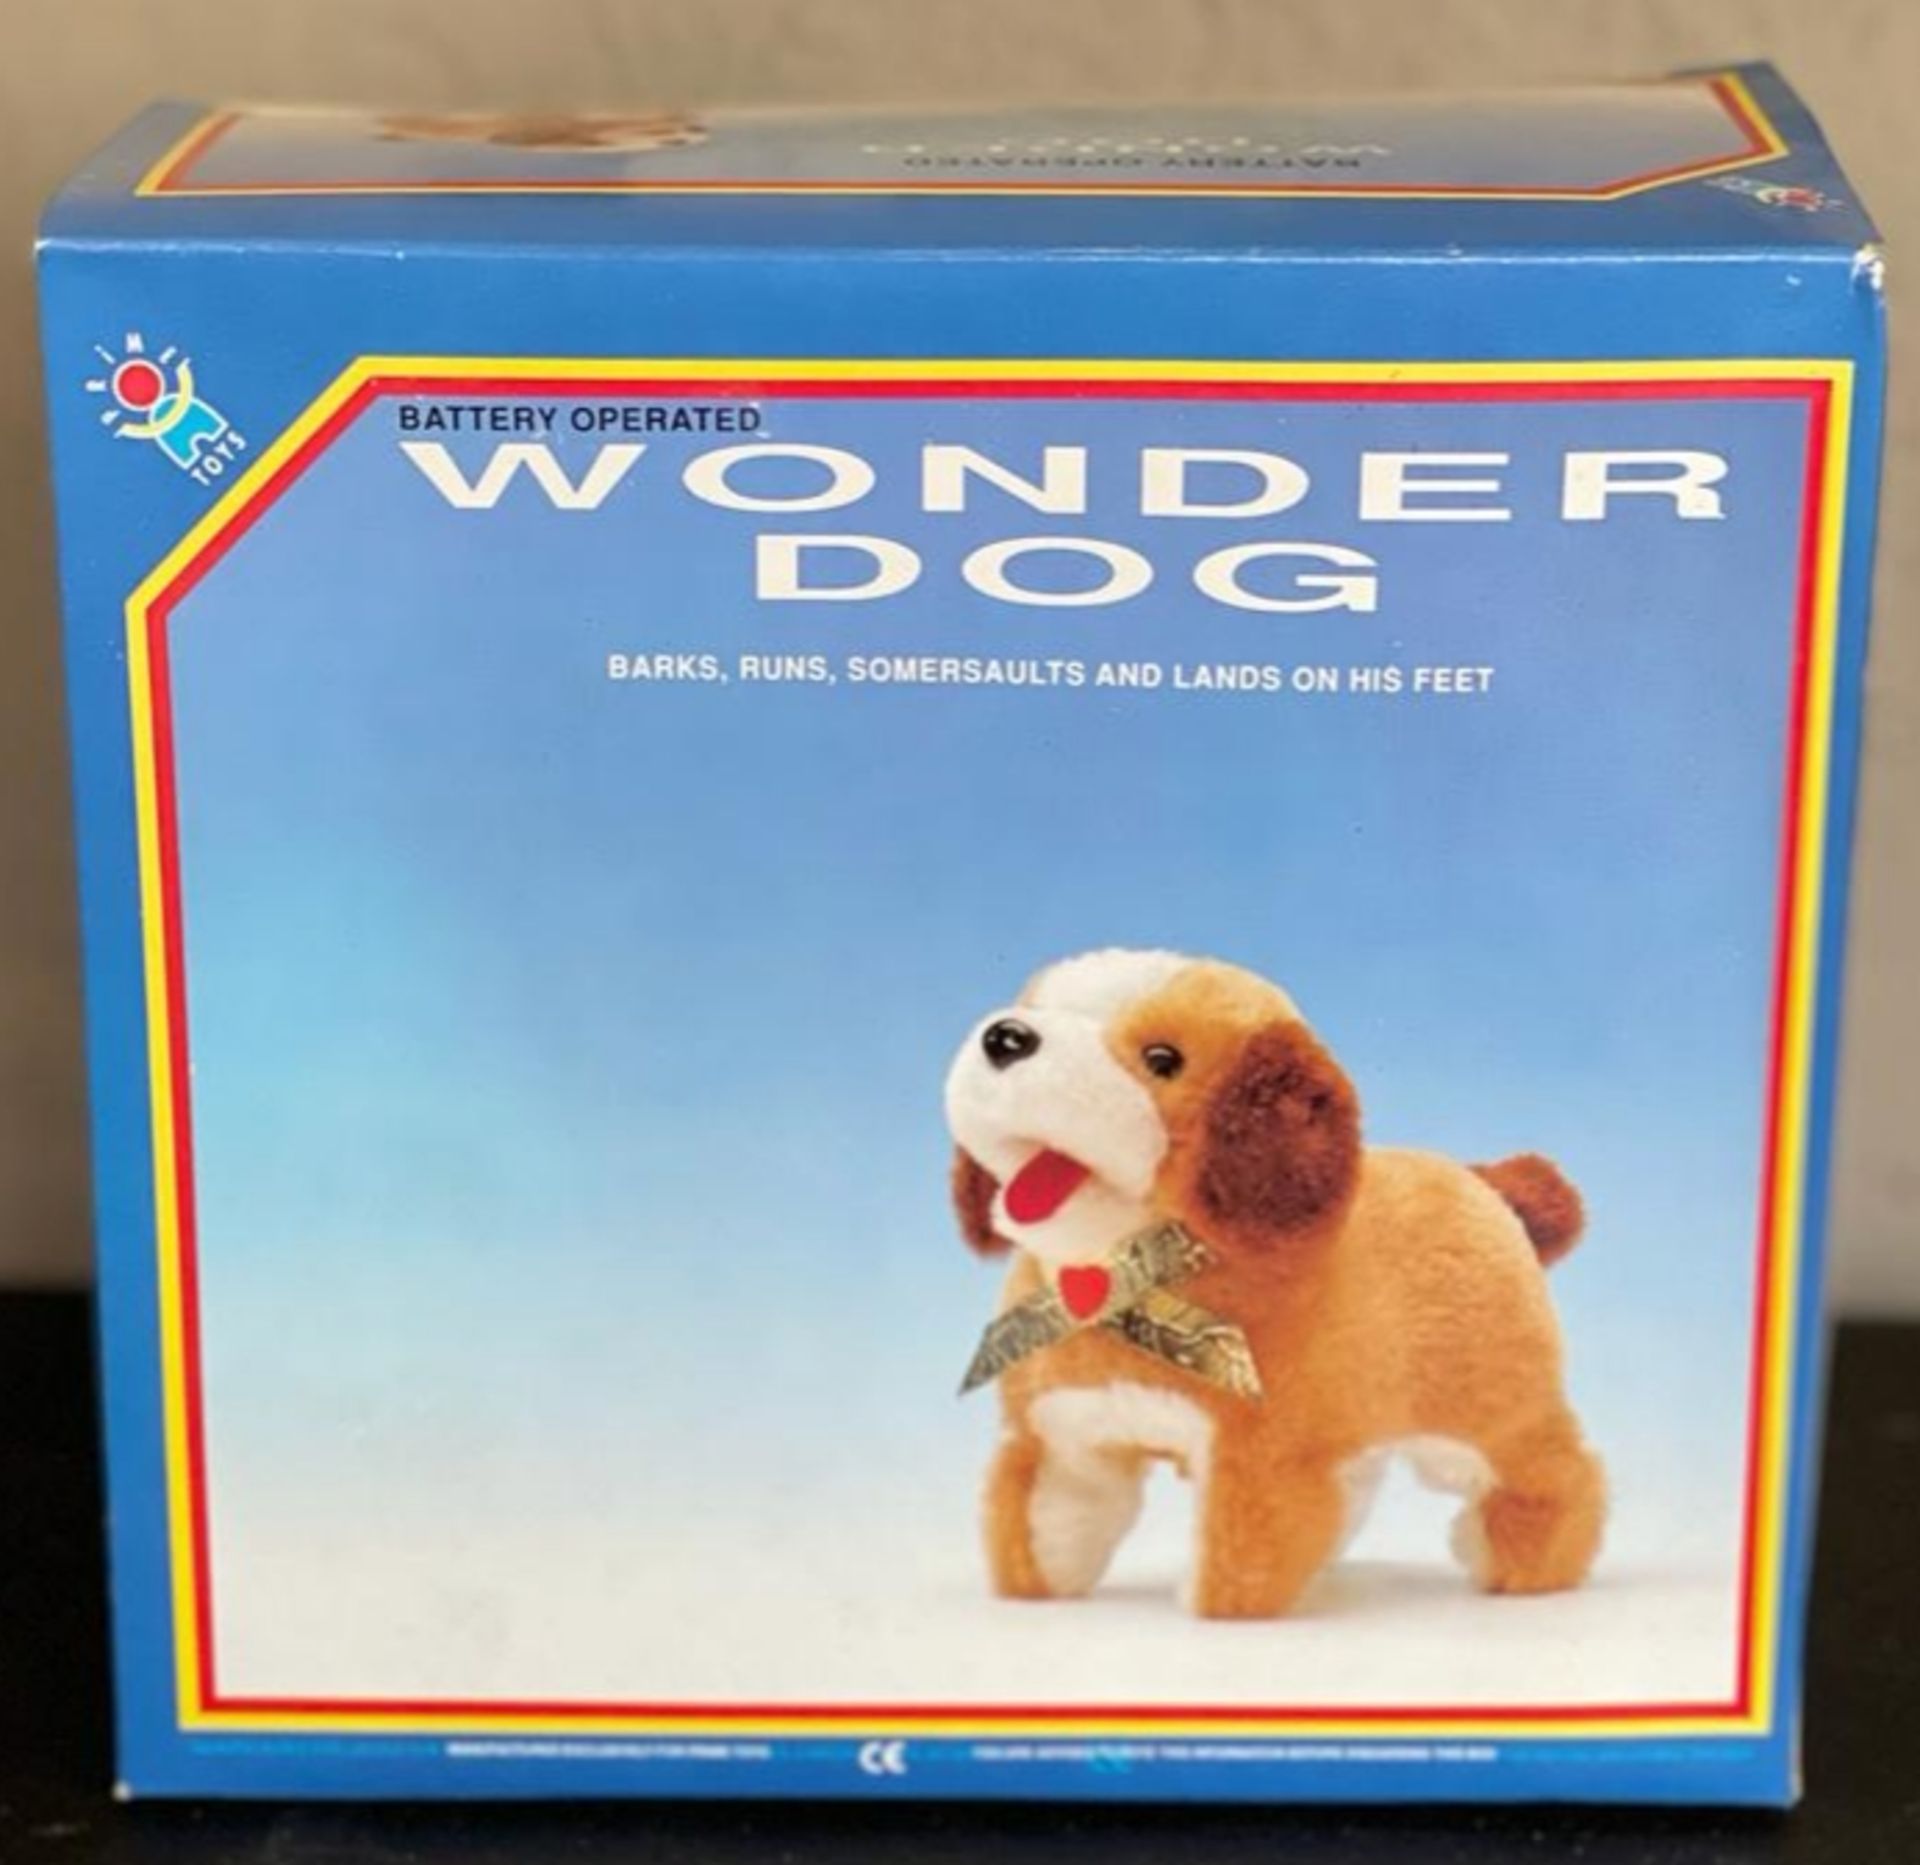 24 x Brand new, Iconic 80s Vintage Toys - Wonder Dog, battery operated